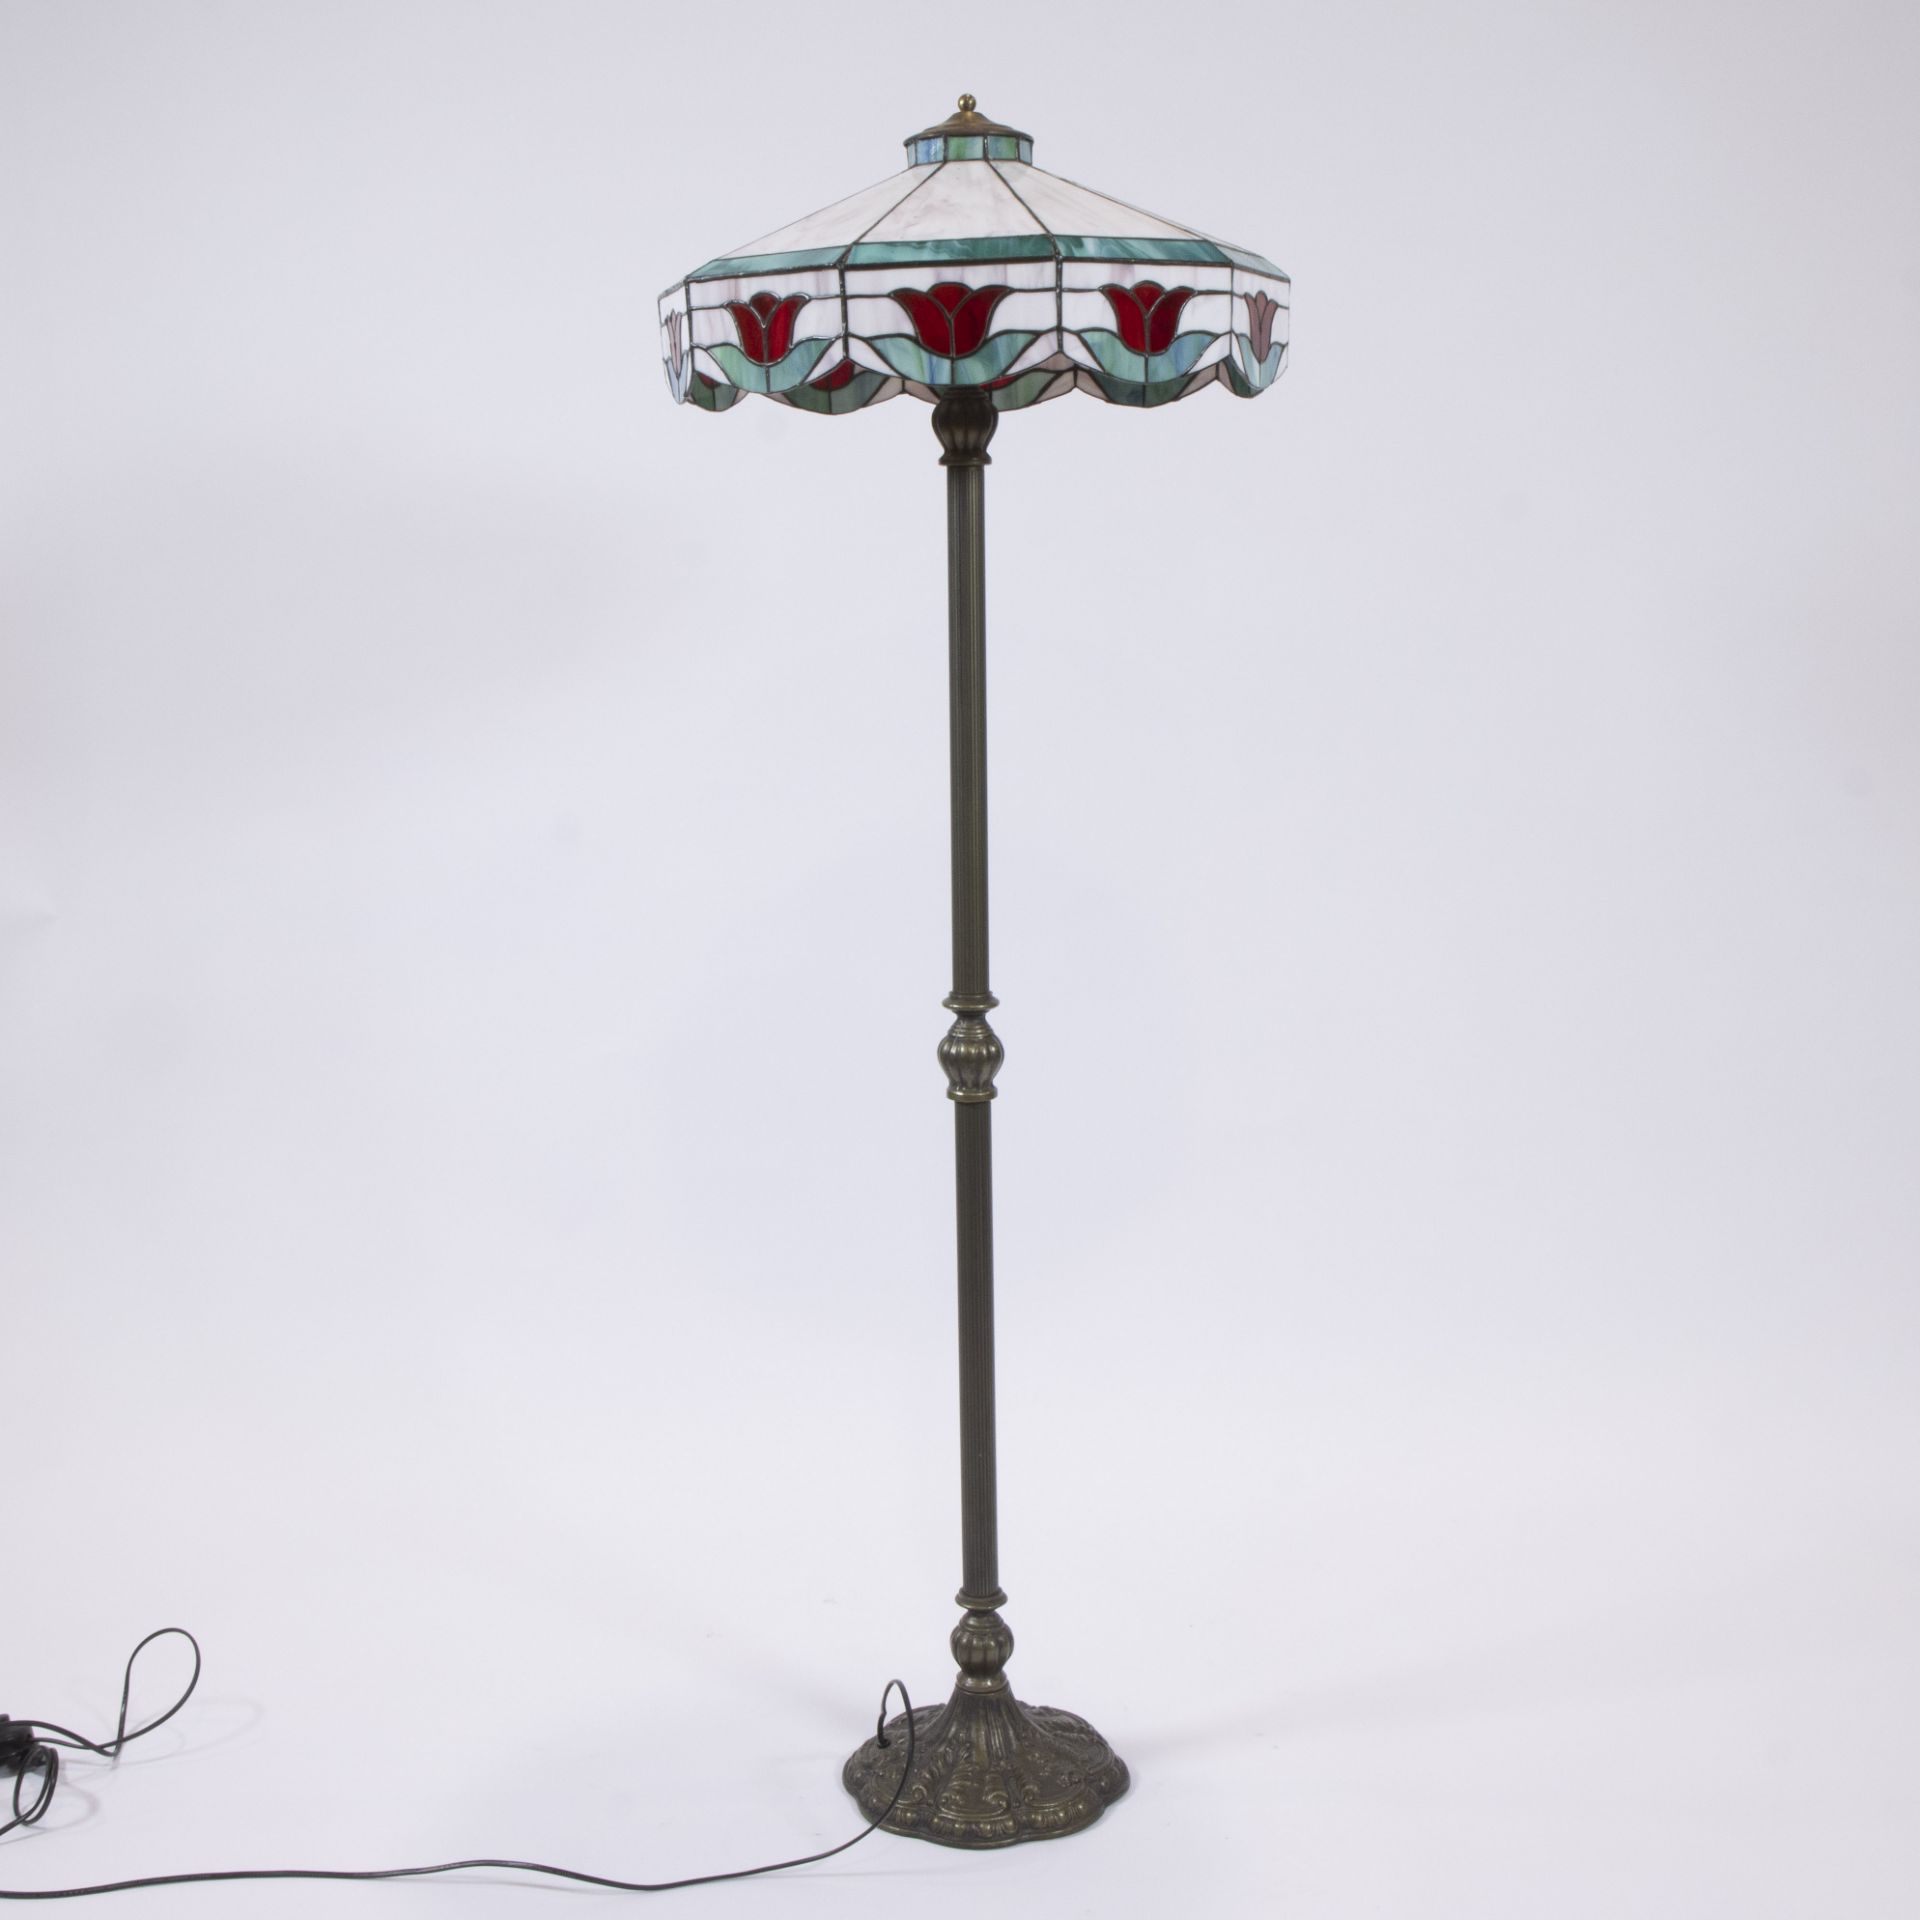 Floor lamp in Tiffany style with stained glass - Image 2 of 4